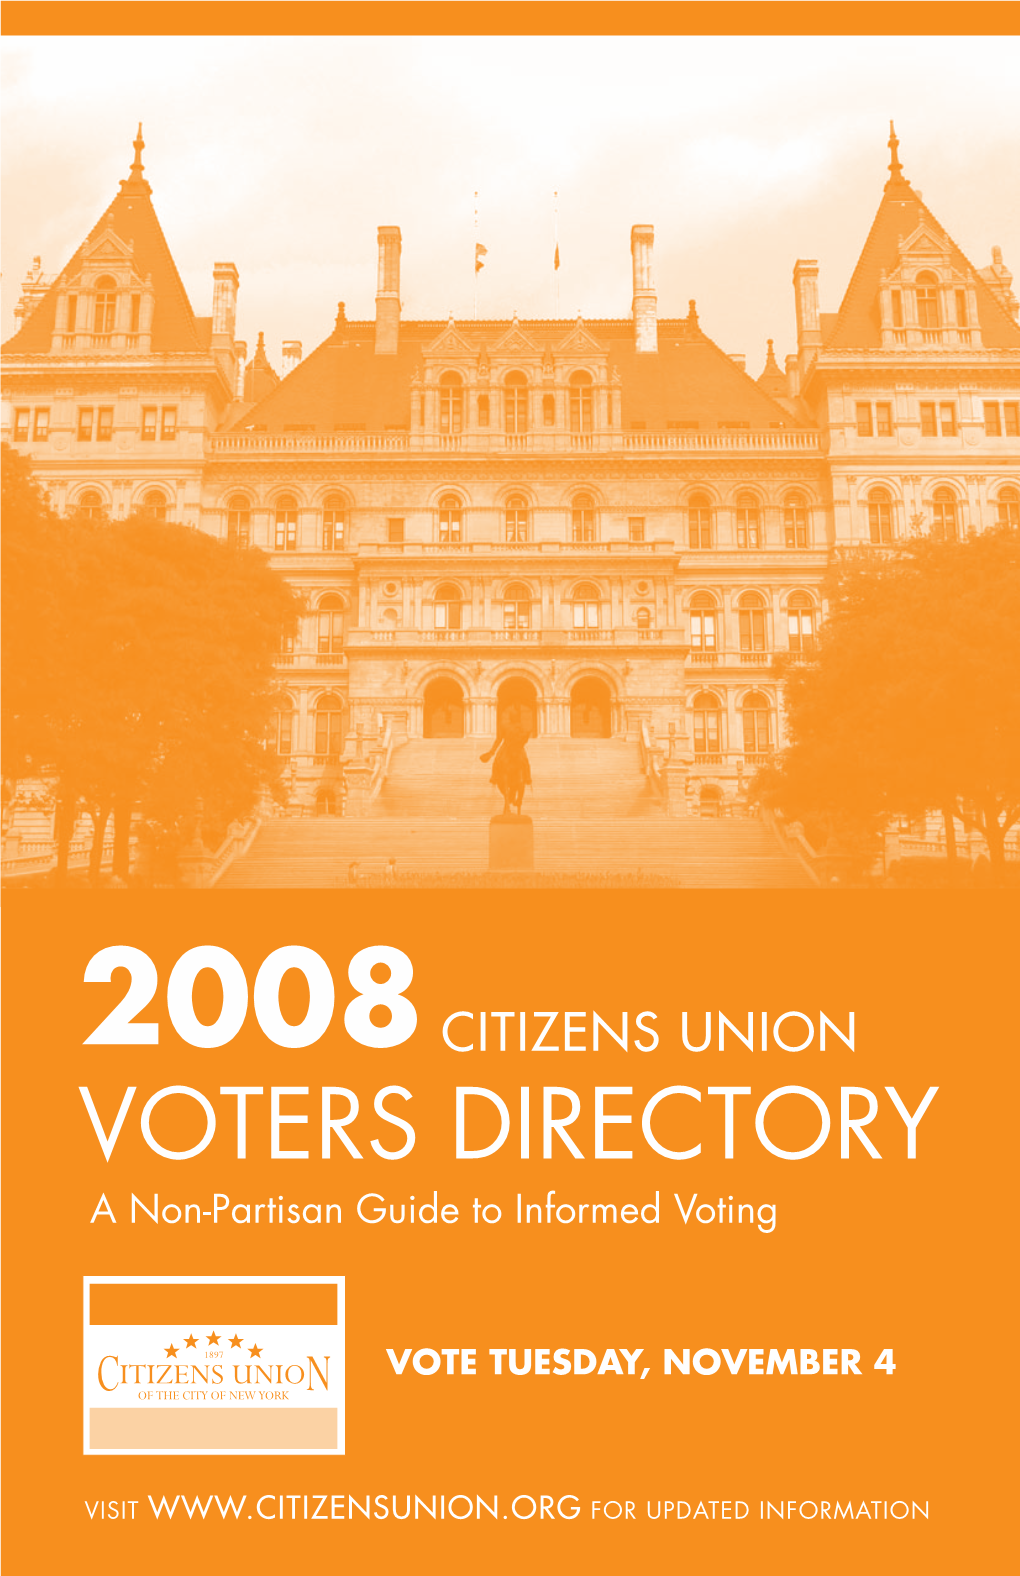 Voters Directory a Non-Partisan Guide to Informed Voting